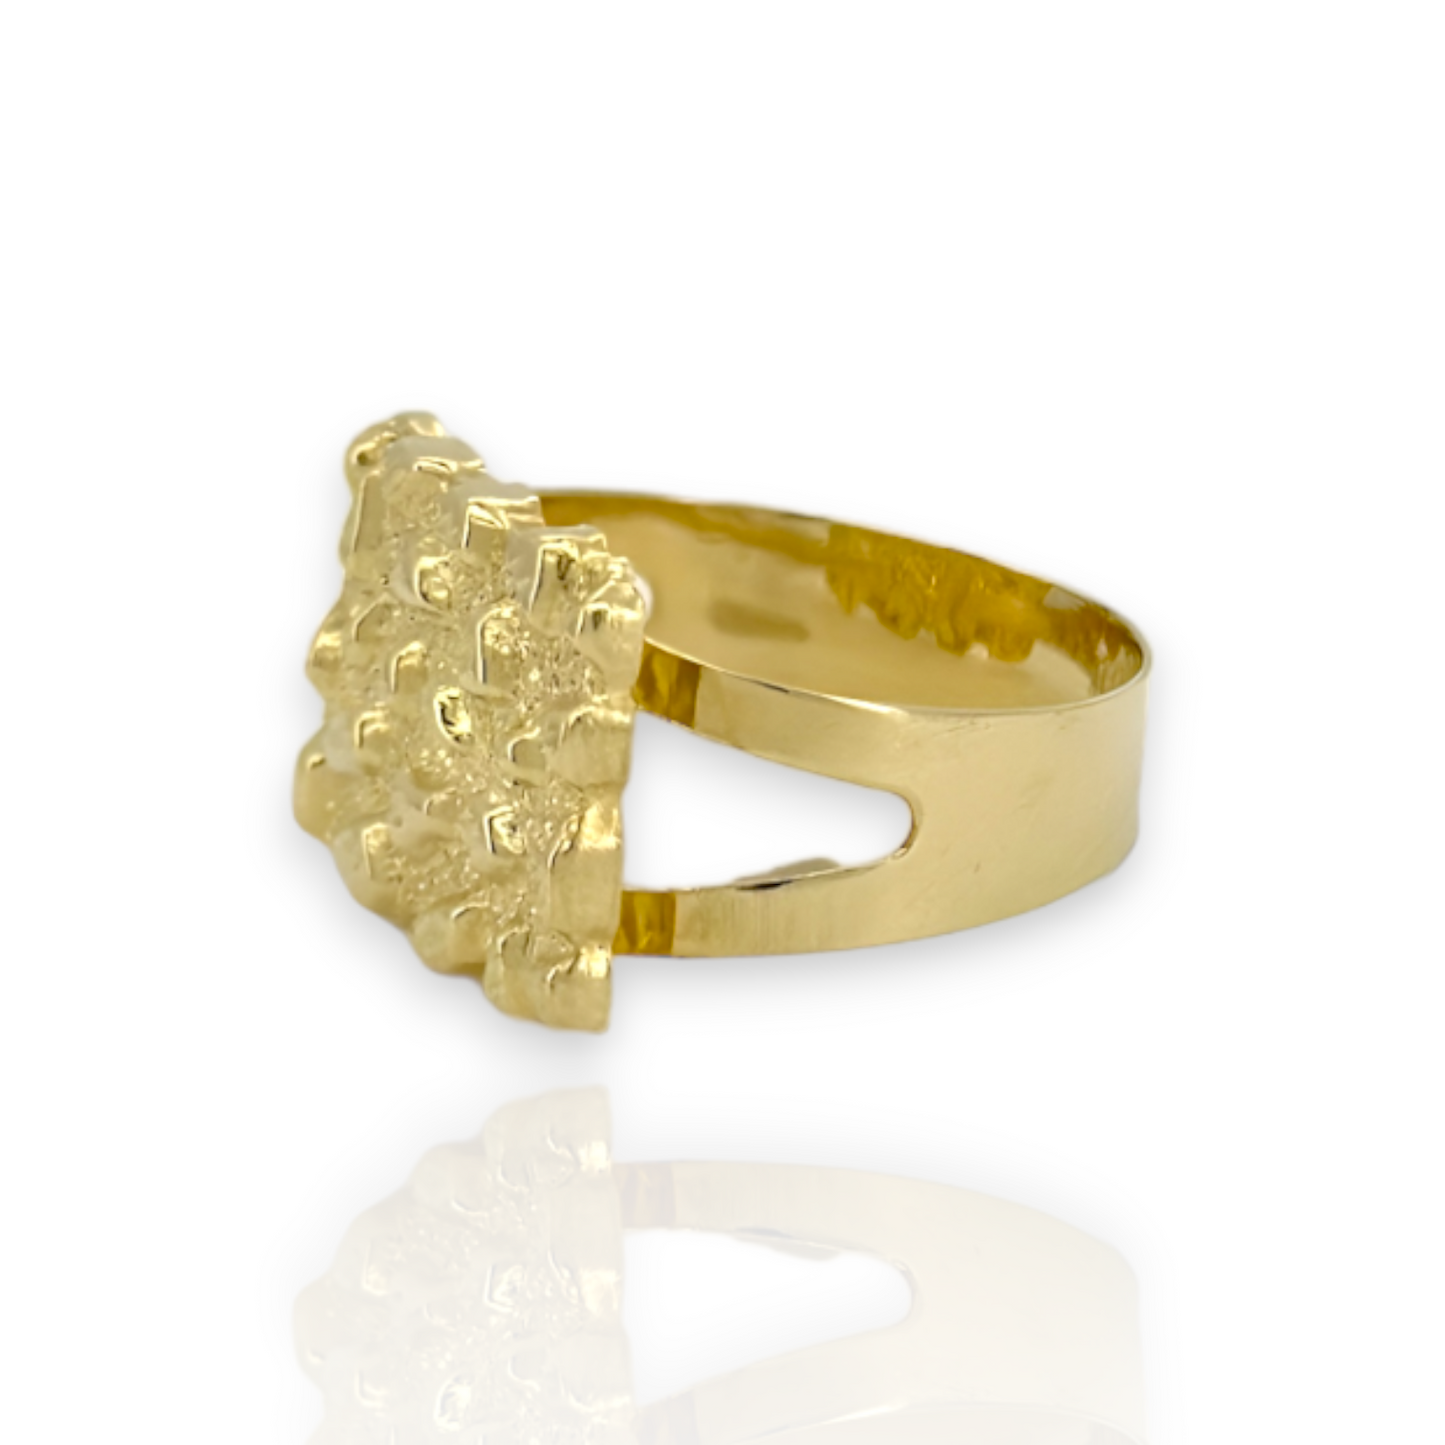 Large Flat Nugget Square Ring - 10K Yellow Gold - Solid